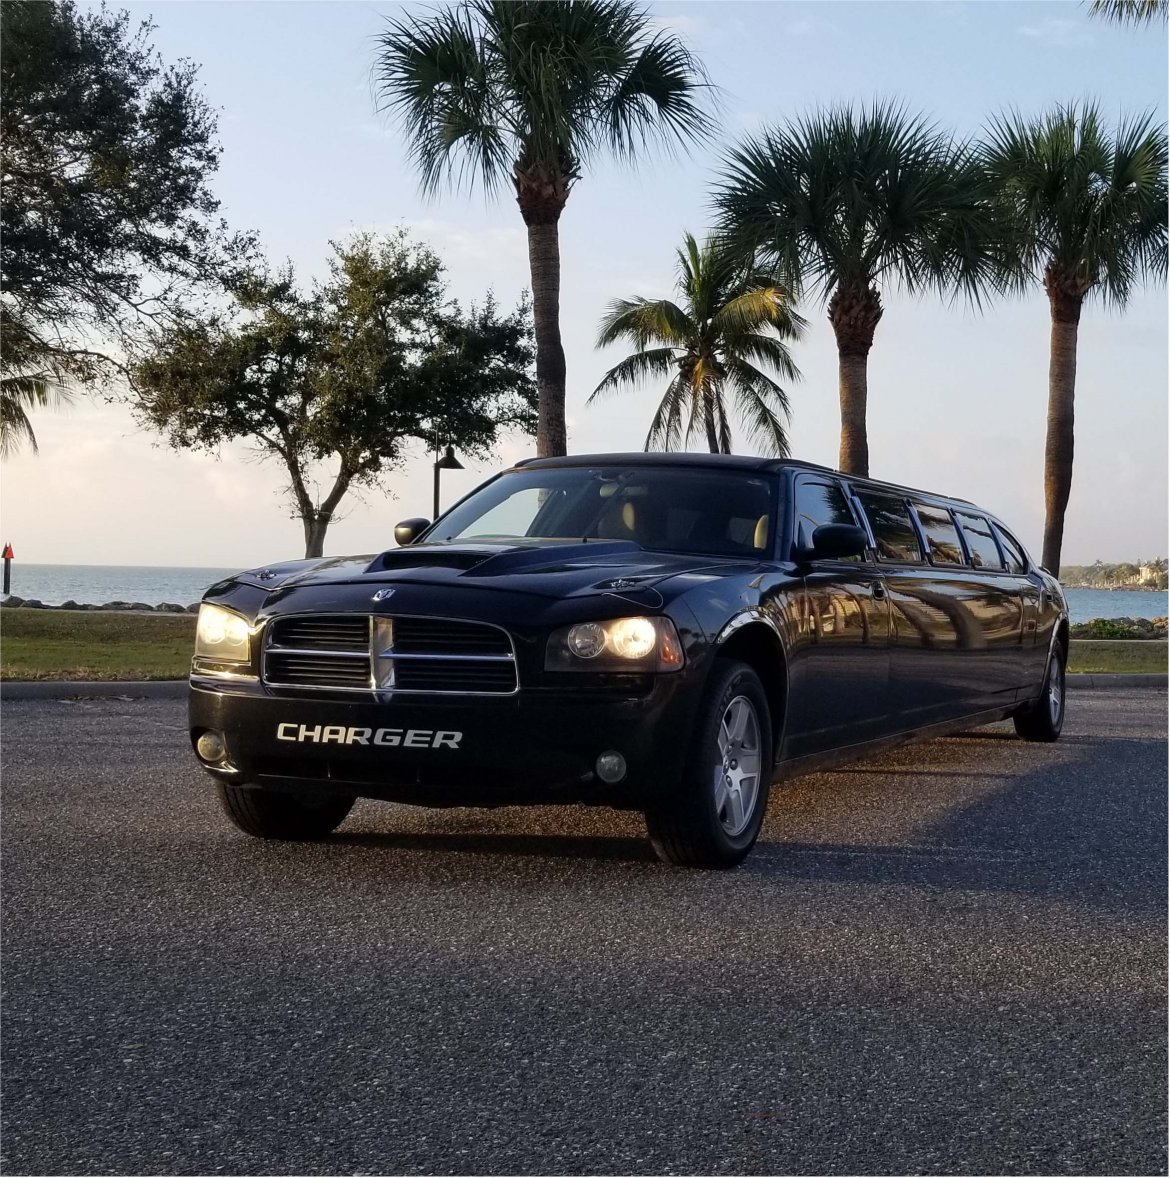 Limousine for sale: 2006 Dodge Charger by Custom Builder for Richard Petty